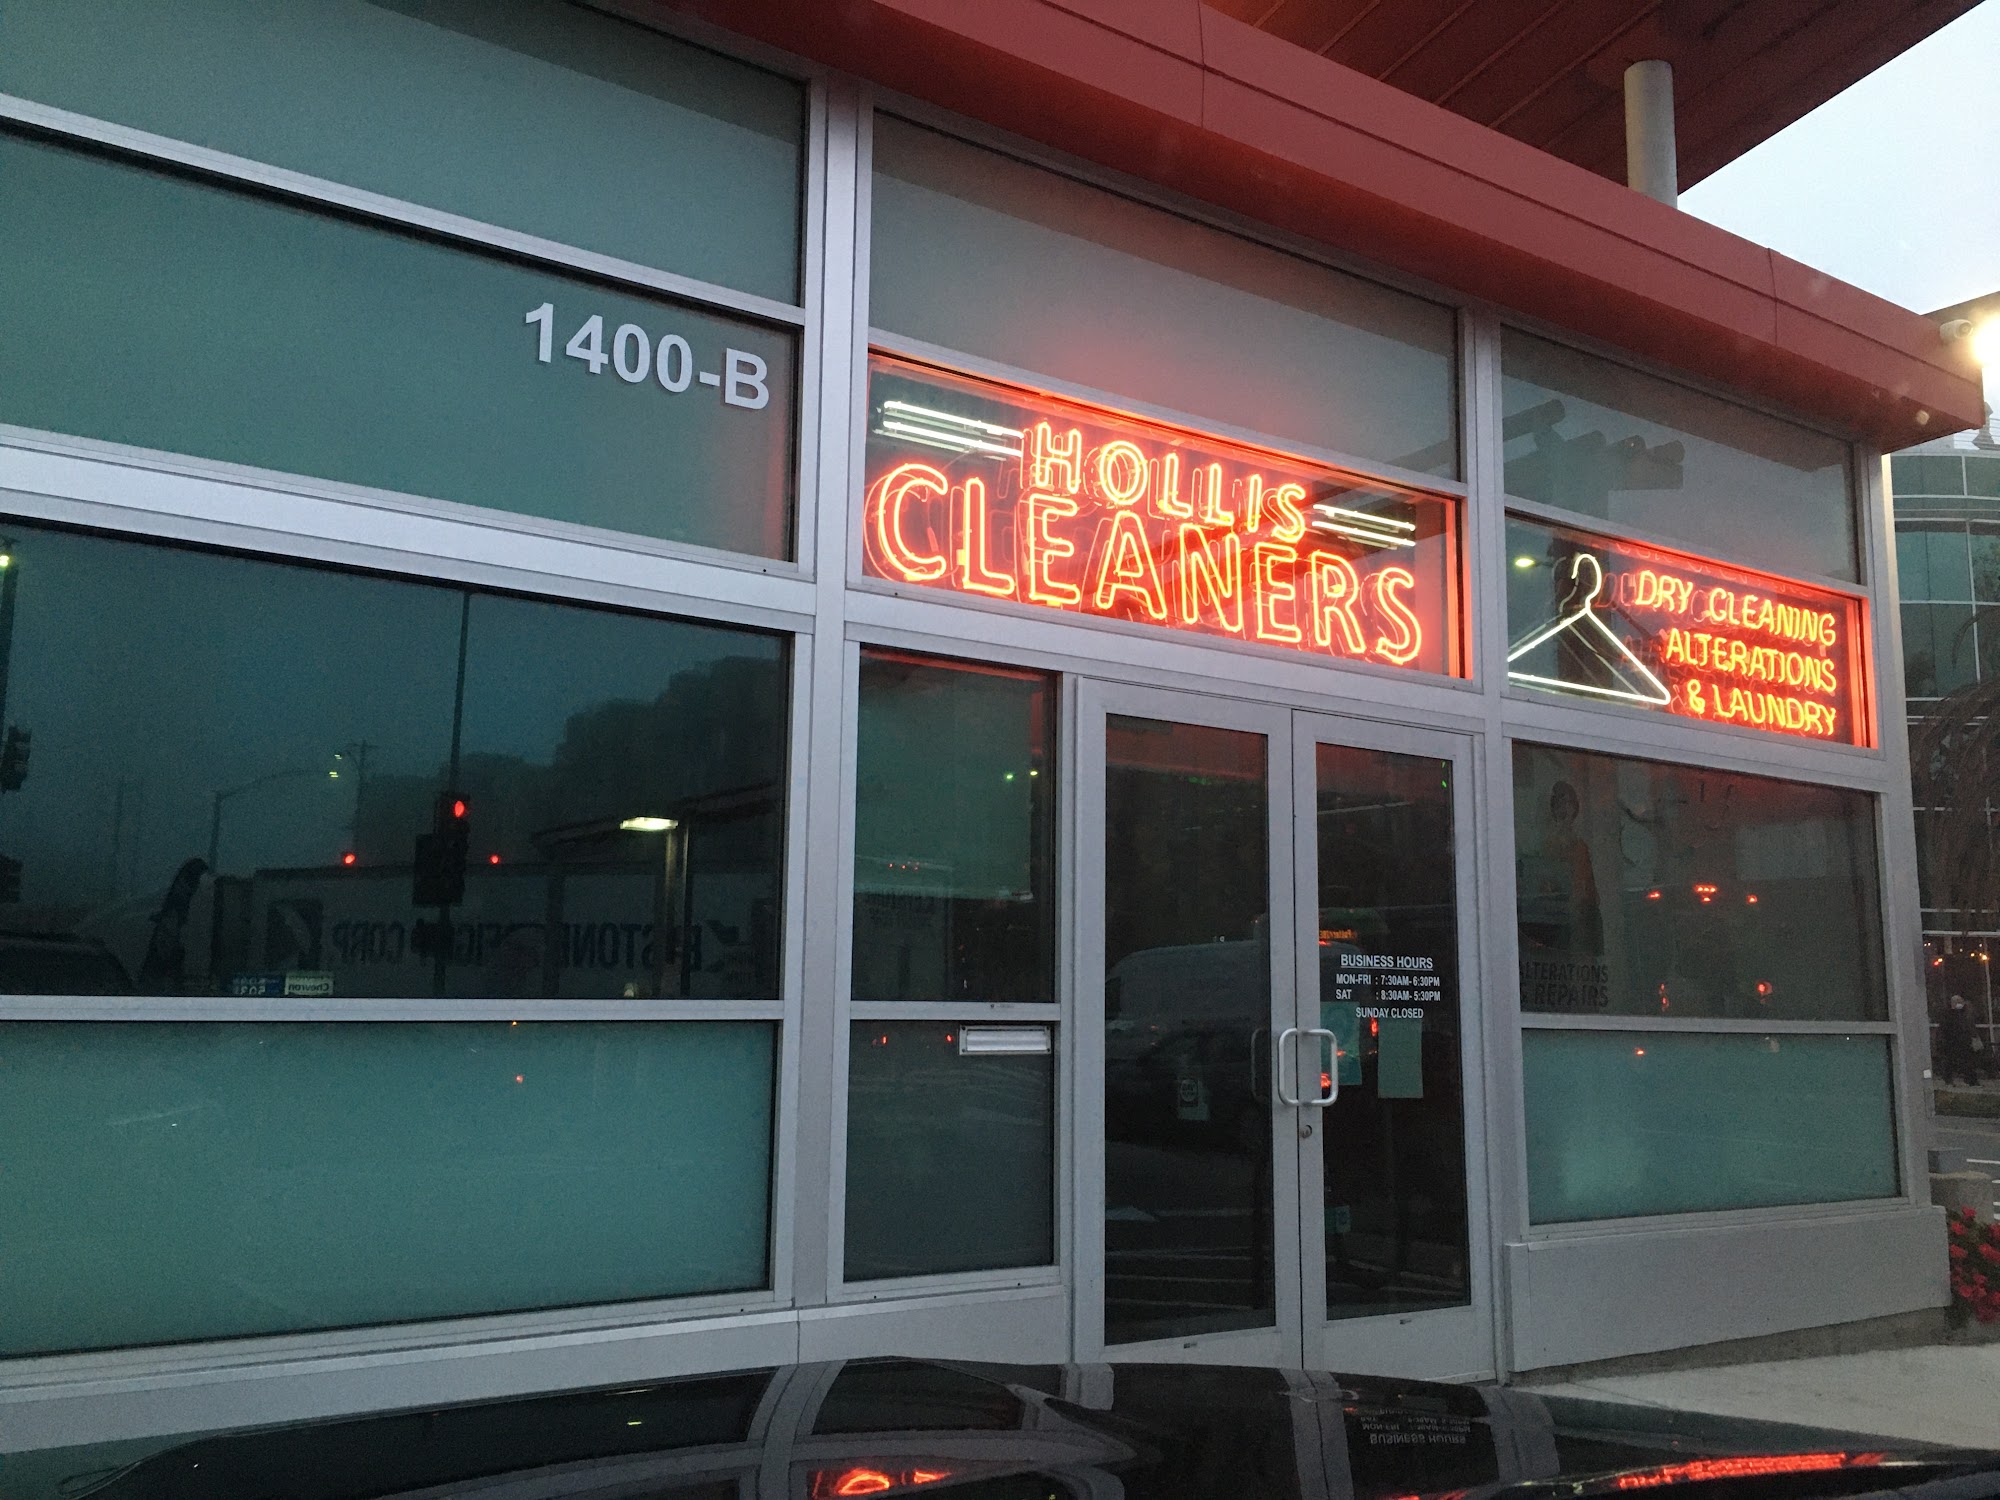 Hollis Cleaners 1400 Powell St, Emeryville California 94608